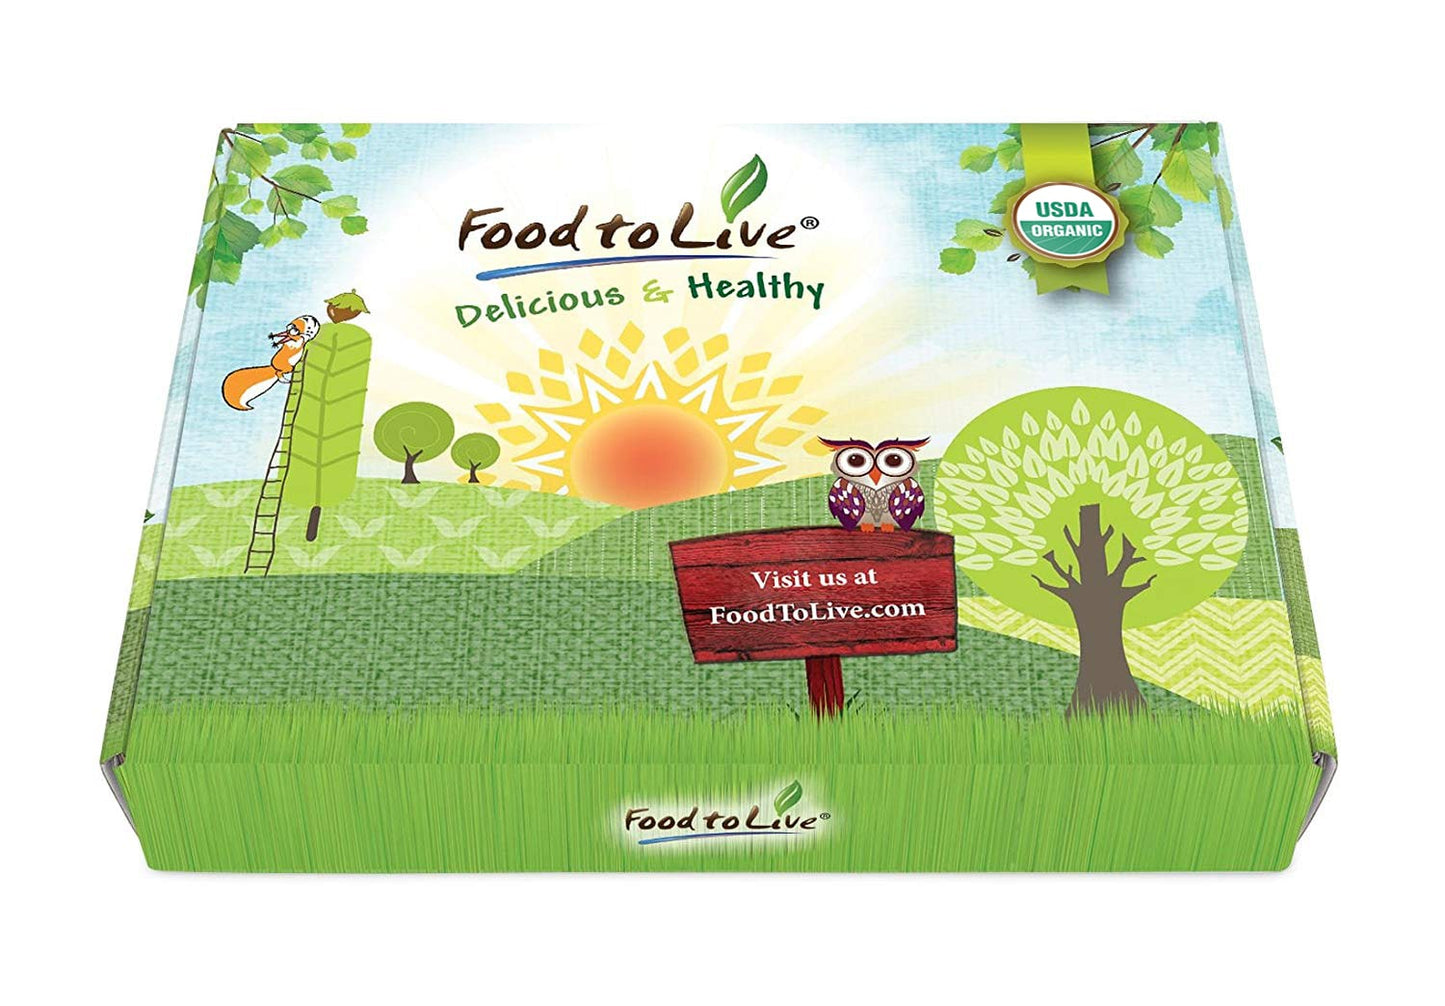 Organic Super Seeds in a Gift Box - Hemp Seeds, White Quinoa, Amaranth, Brown Basmati Rice, and Chia Seeds - by Food to Live